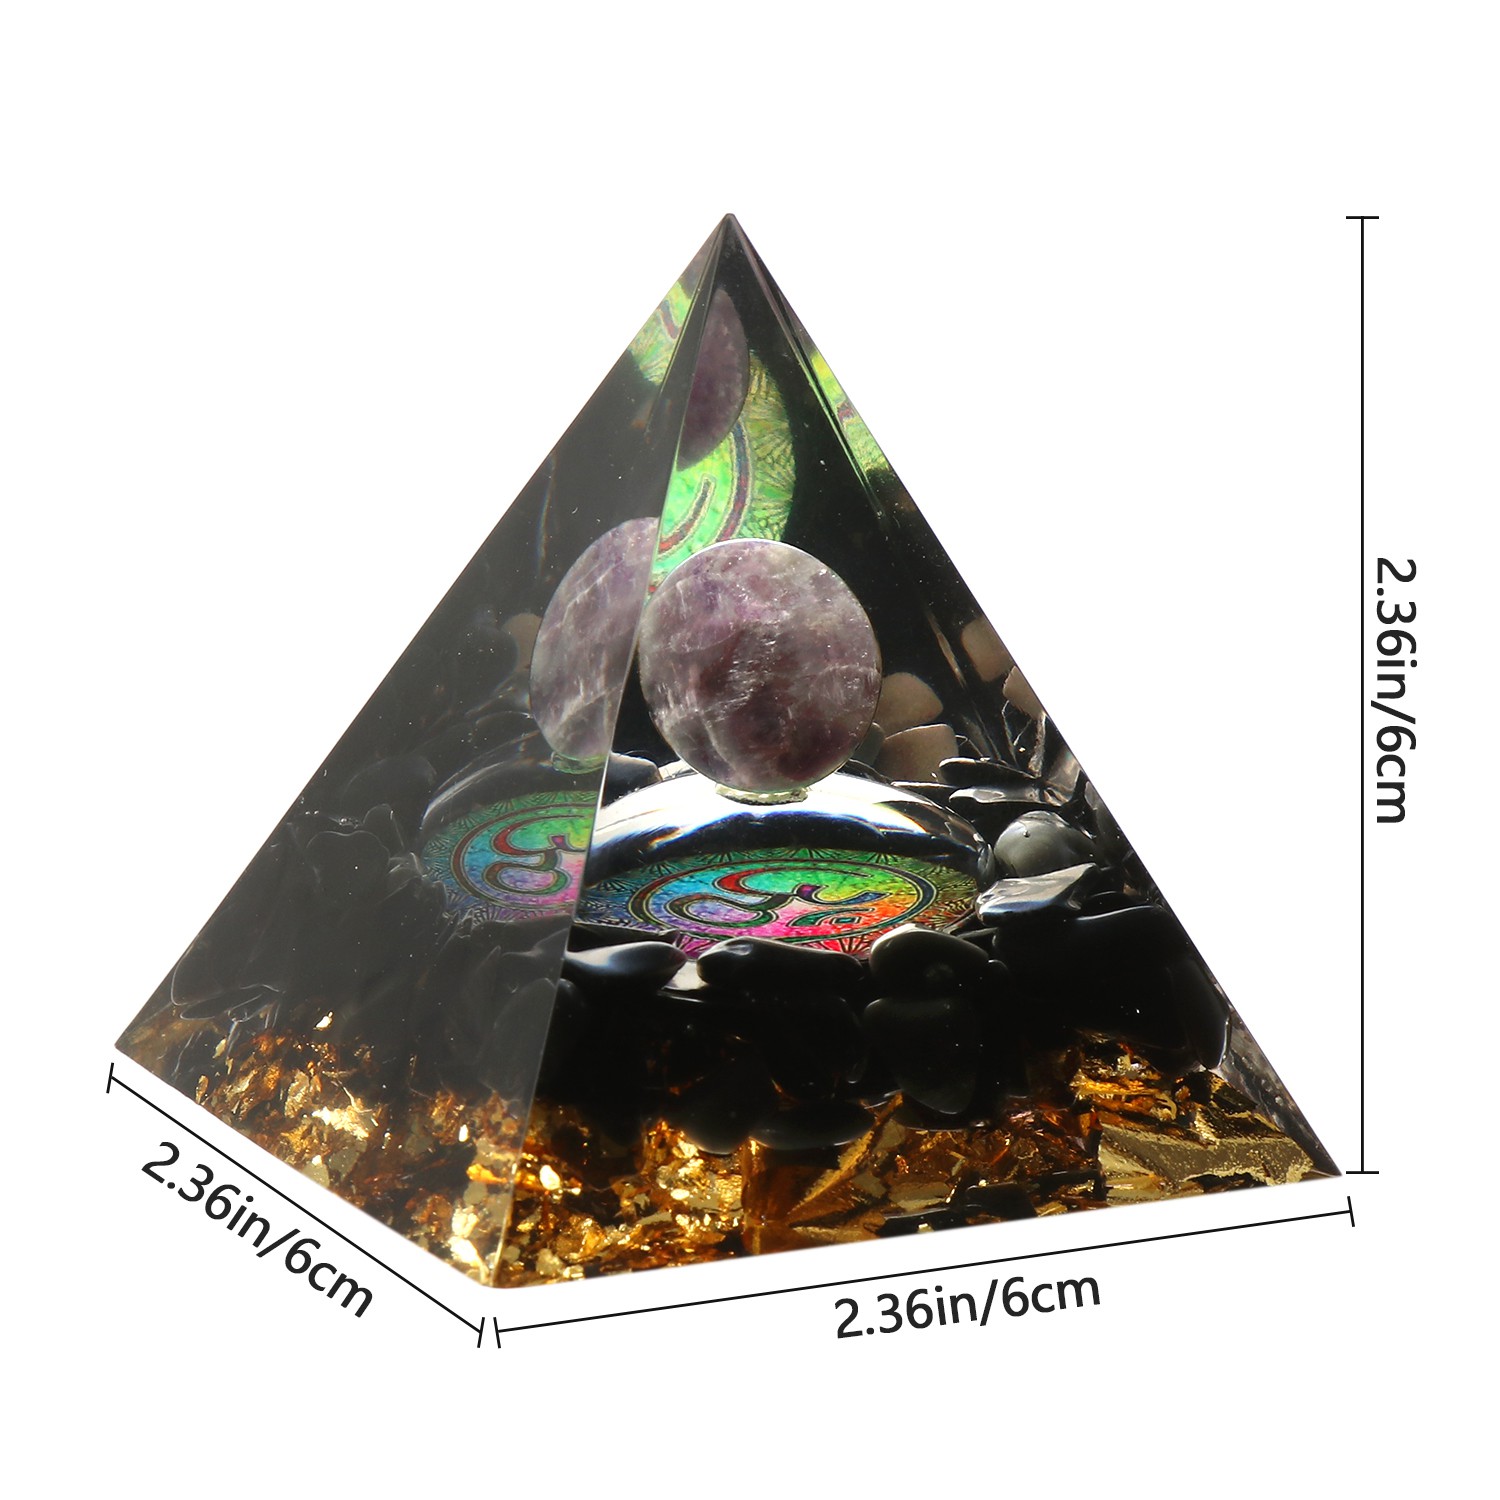 ☆YOLA☆ Shelf Decor Orgone Pyramid Boost Immune System|Decor Positive Energy Generator Chakra|Orgonite Hand Craft Gifts for Women Spirtual Things with Obsidian|EMF Protection – Healing